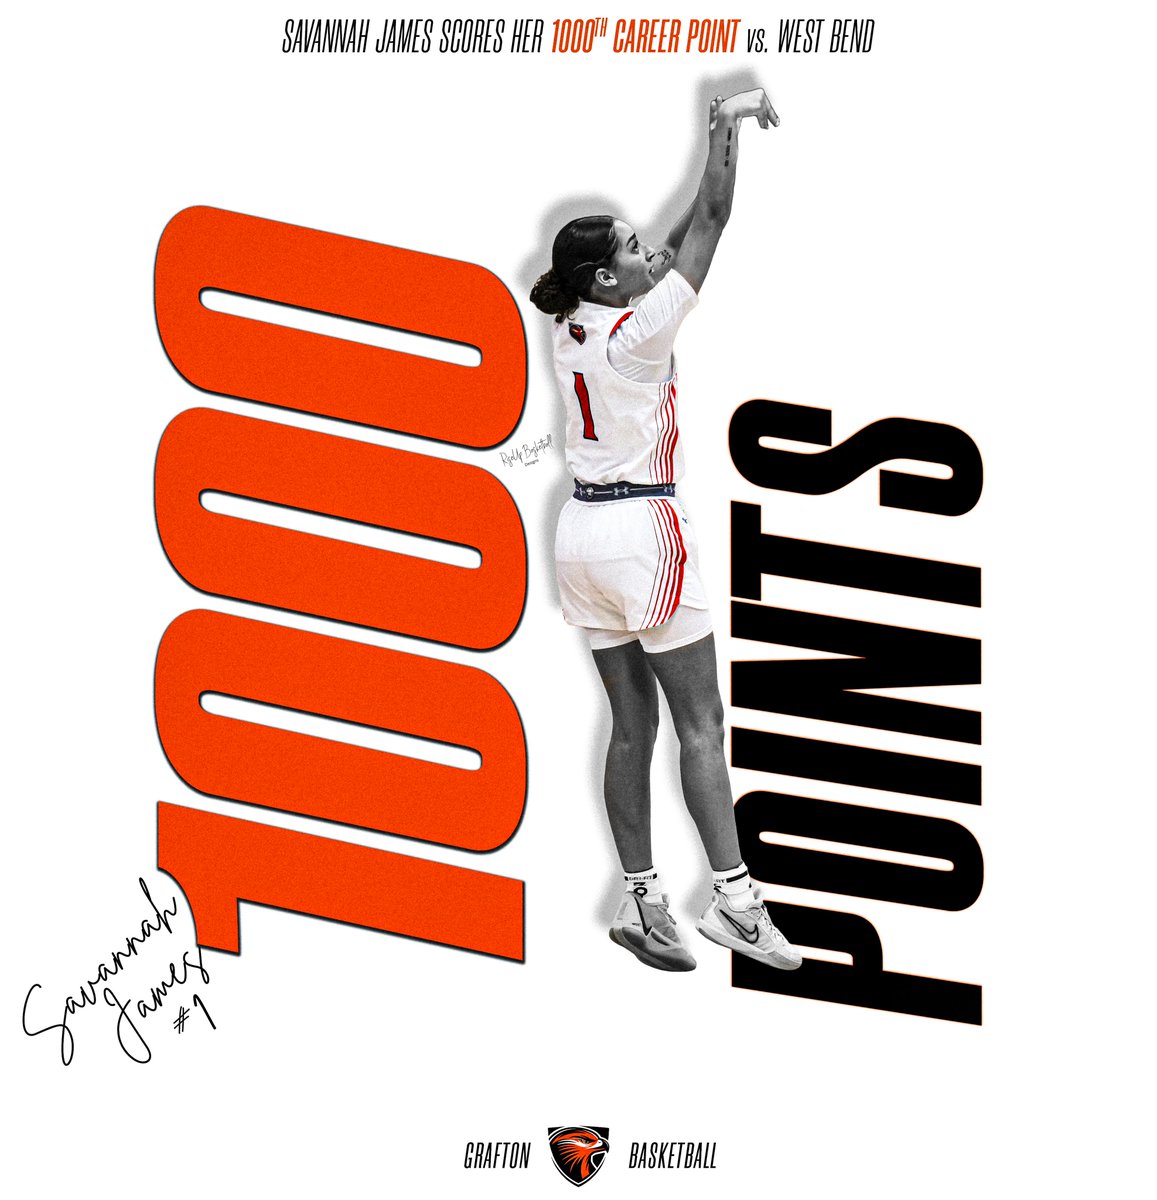 Hey everyone! Let's give it up for Savannah James (@savannahj_2024), the #1 guard for Grafton H.S. (@Grafton6thwoman) and a future Quincy University player, who just hit a major milestone – 1,000 career points! 🏀🌟 This sharpshooter's got skills that have helped power Grafton